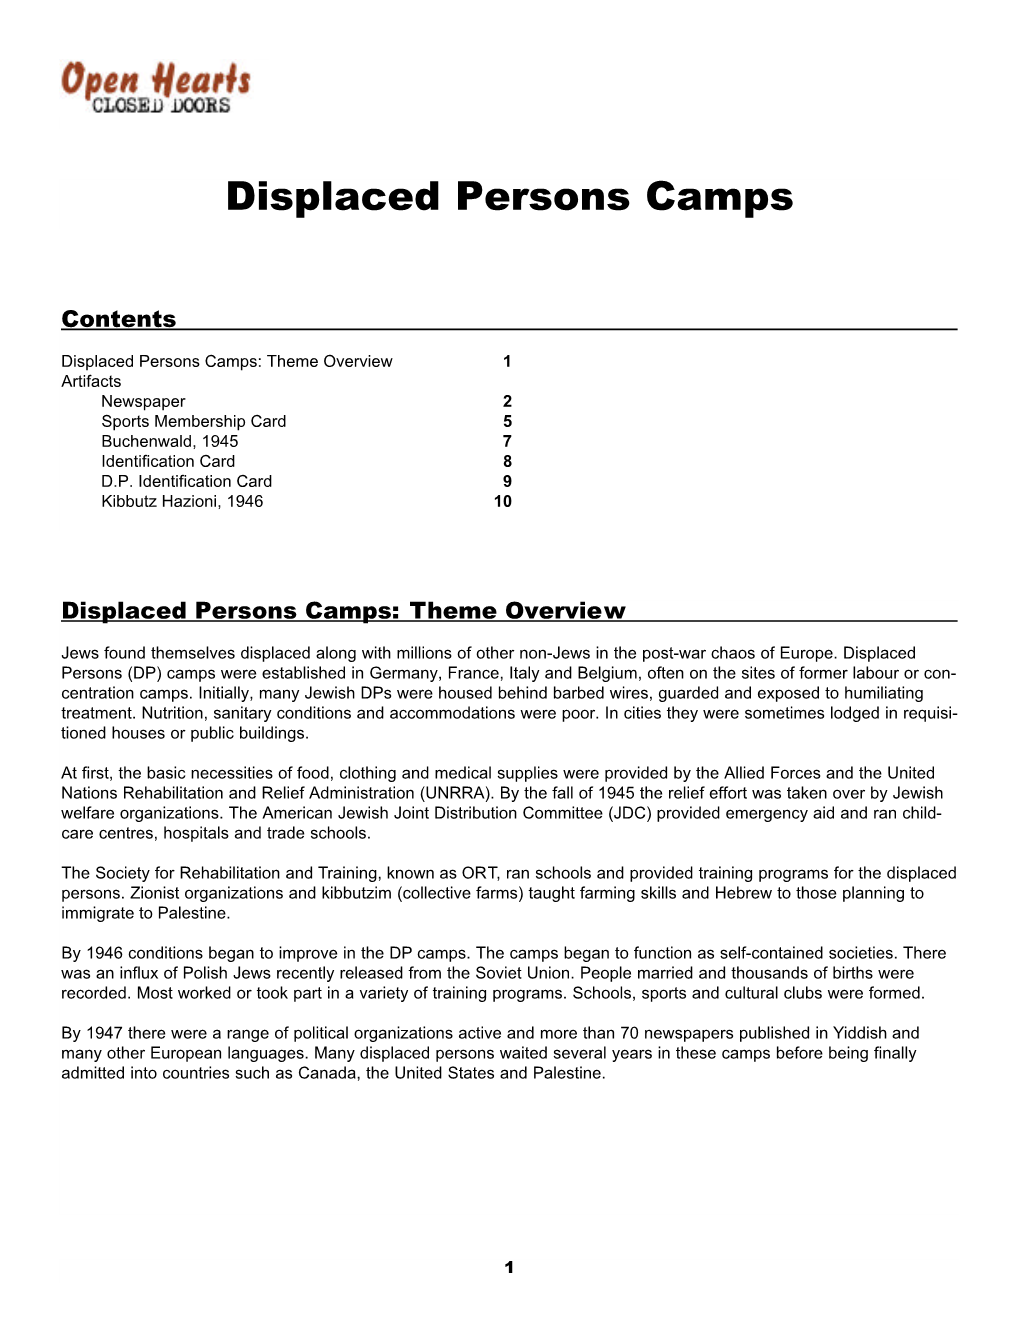 Displaced Persons Camps